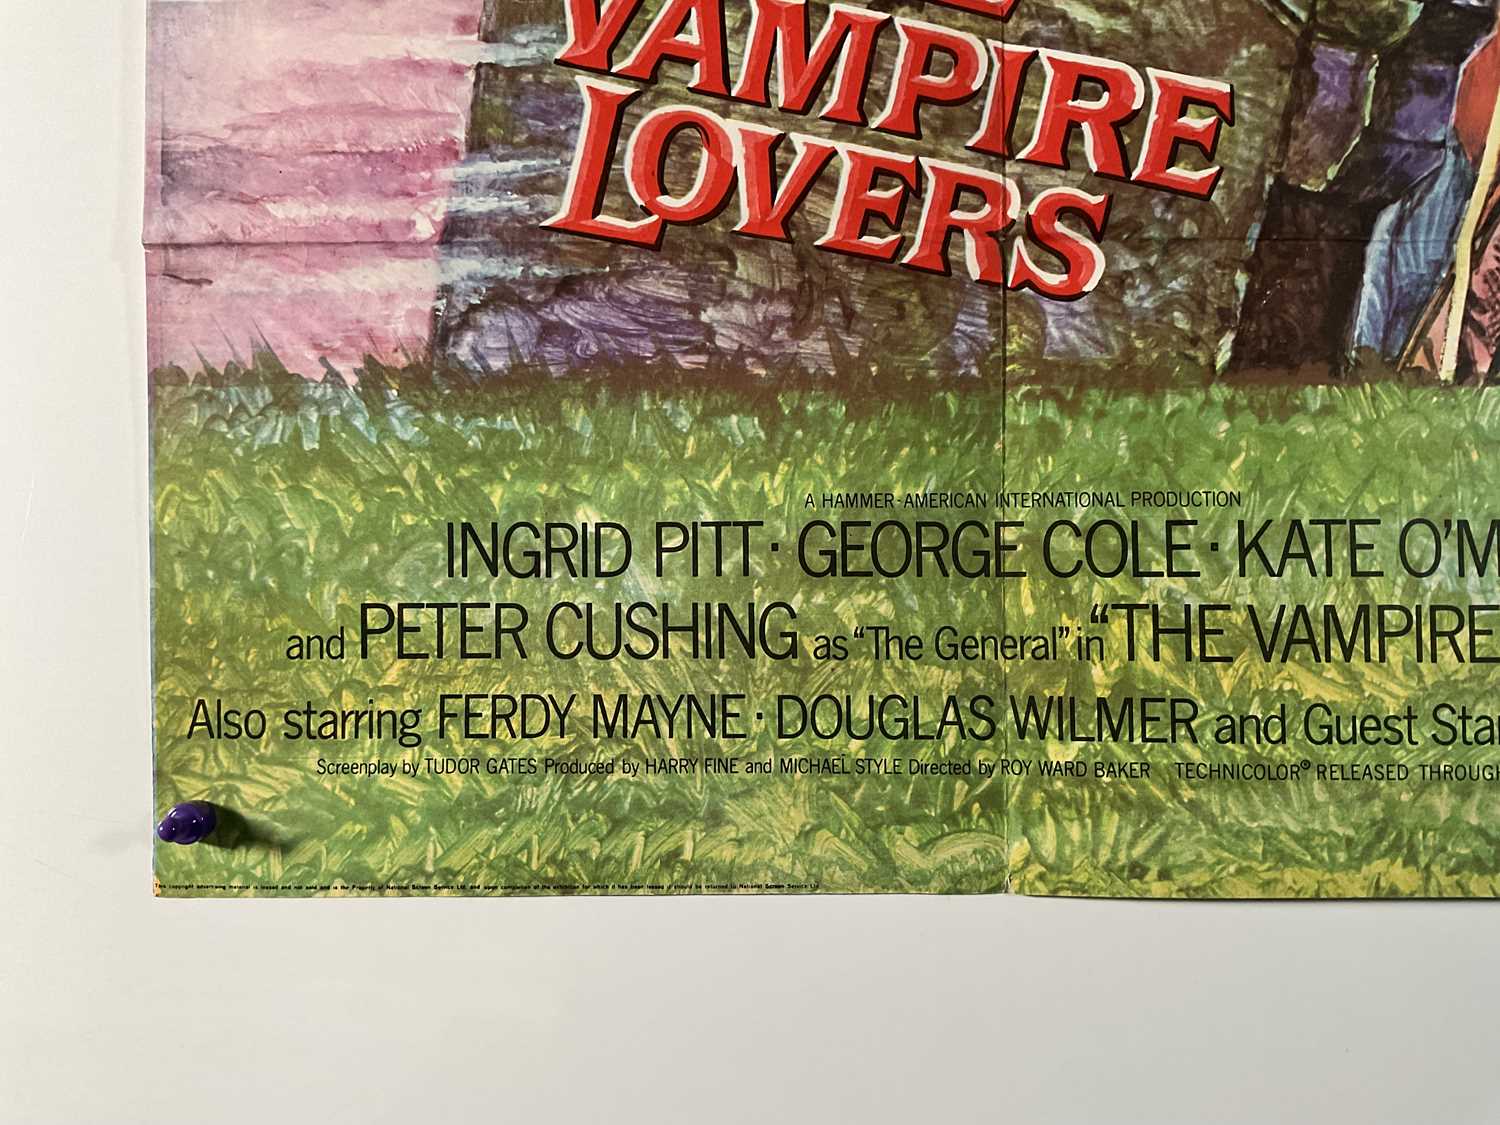 THE VAMPIRE LOVERS / ANGELS FROM HELL (1970) Double-Bill UK Quad film poster, Hammer Horror, first - Image 2 of 6